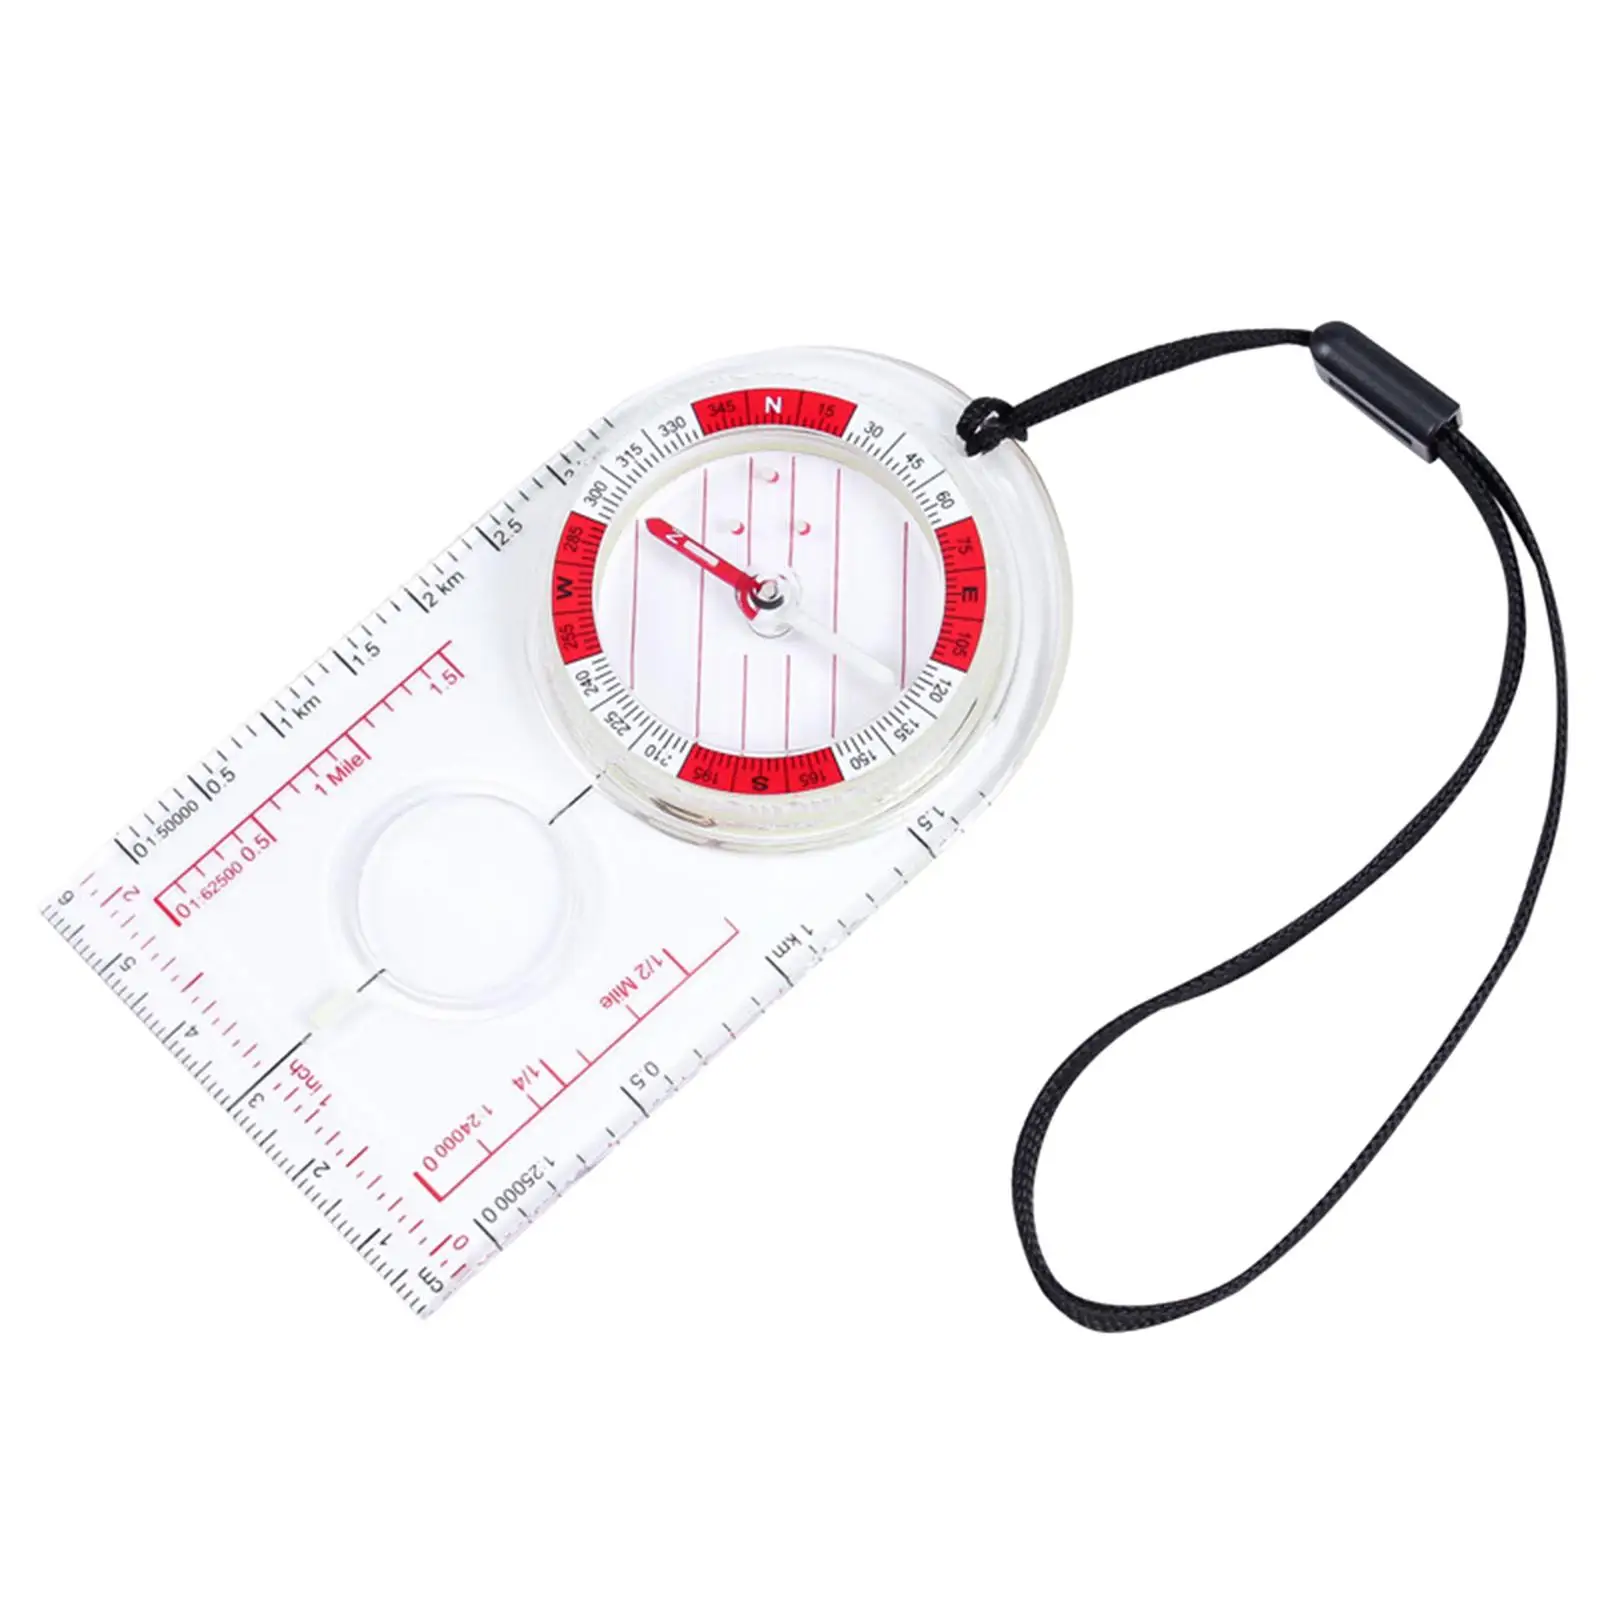 Orienteering Compass Advanced Clear Outdoor Luminous Compass for Training Hiking Reading Survival Camping Backpacking